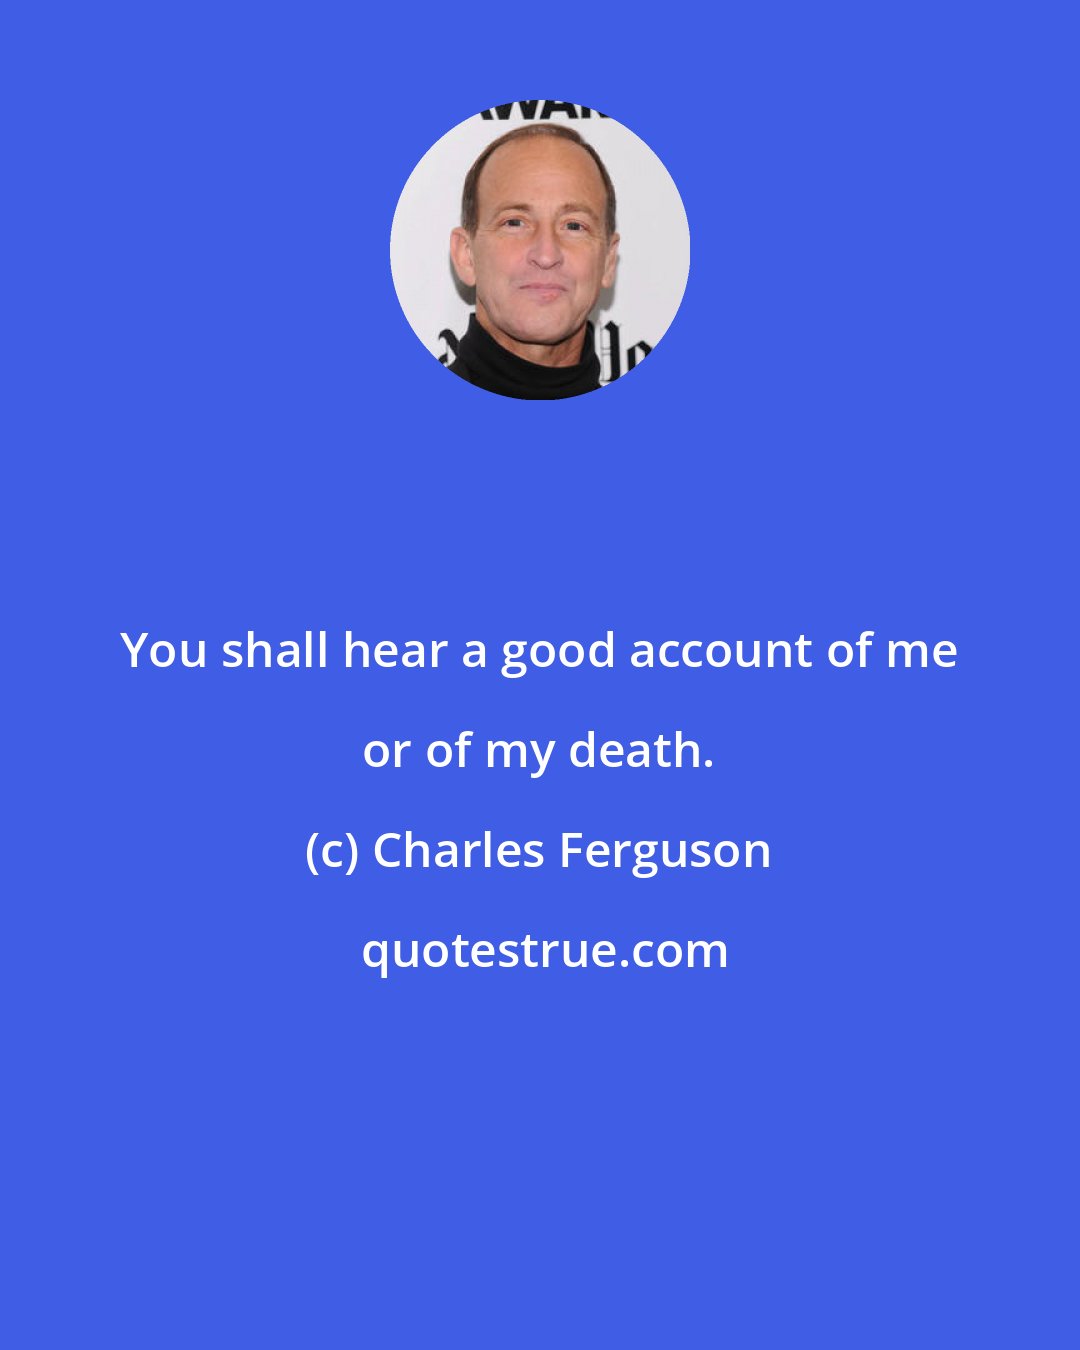 Charles Ferguson: You shall hear a good account of me or of my death.